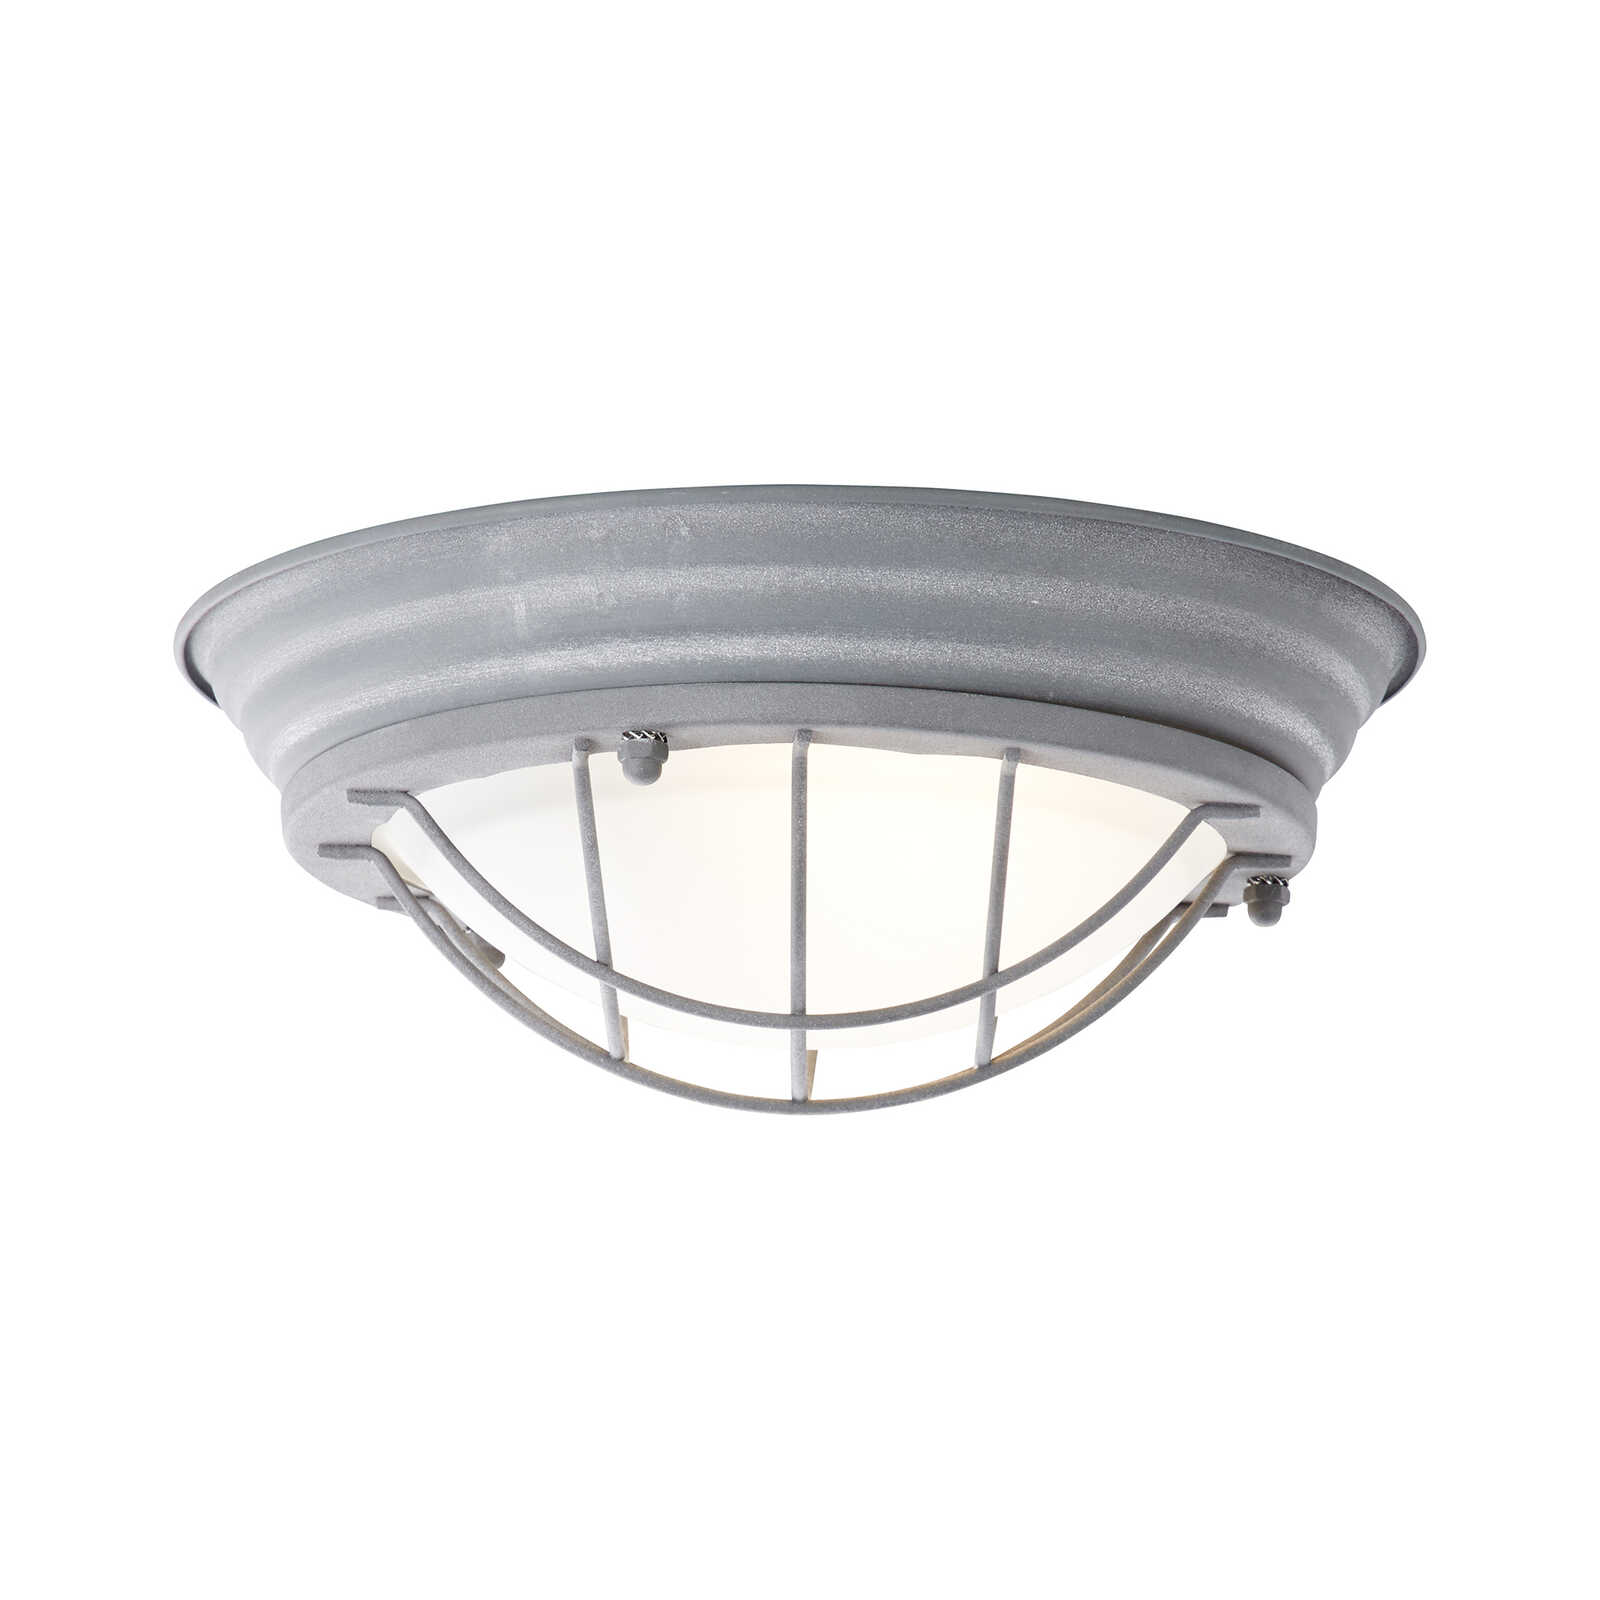 Metal wall and ceiling light - Sina 6 - Grey
